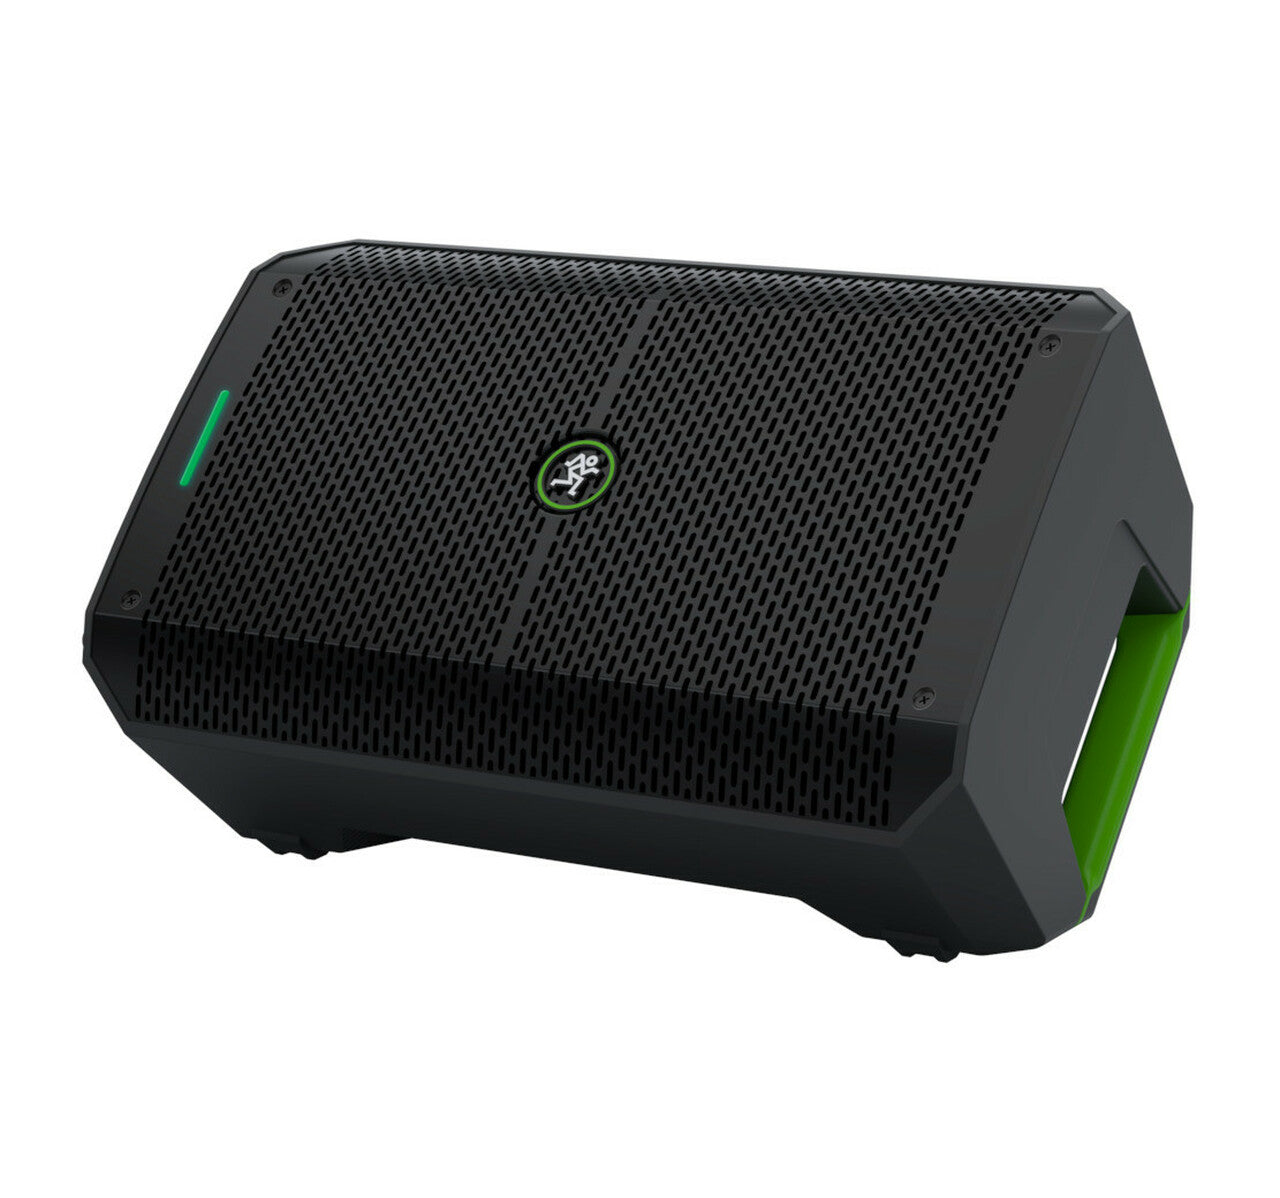 Mackie Thump GO 8" Portable Battery-Powered Rechargeable DJ PA Bluetooth Speaker+ Mackie Thump GO Carry Bag